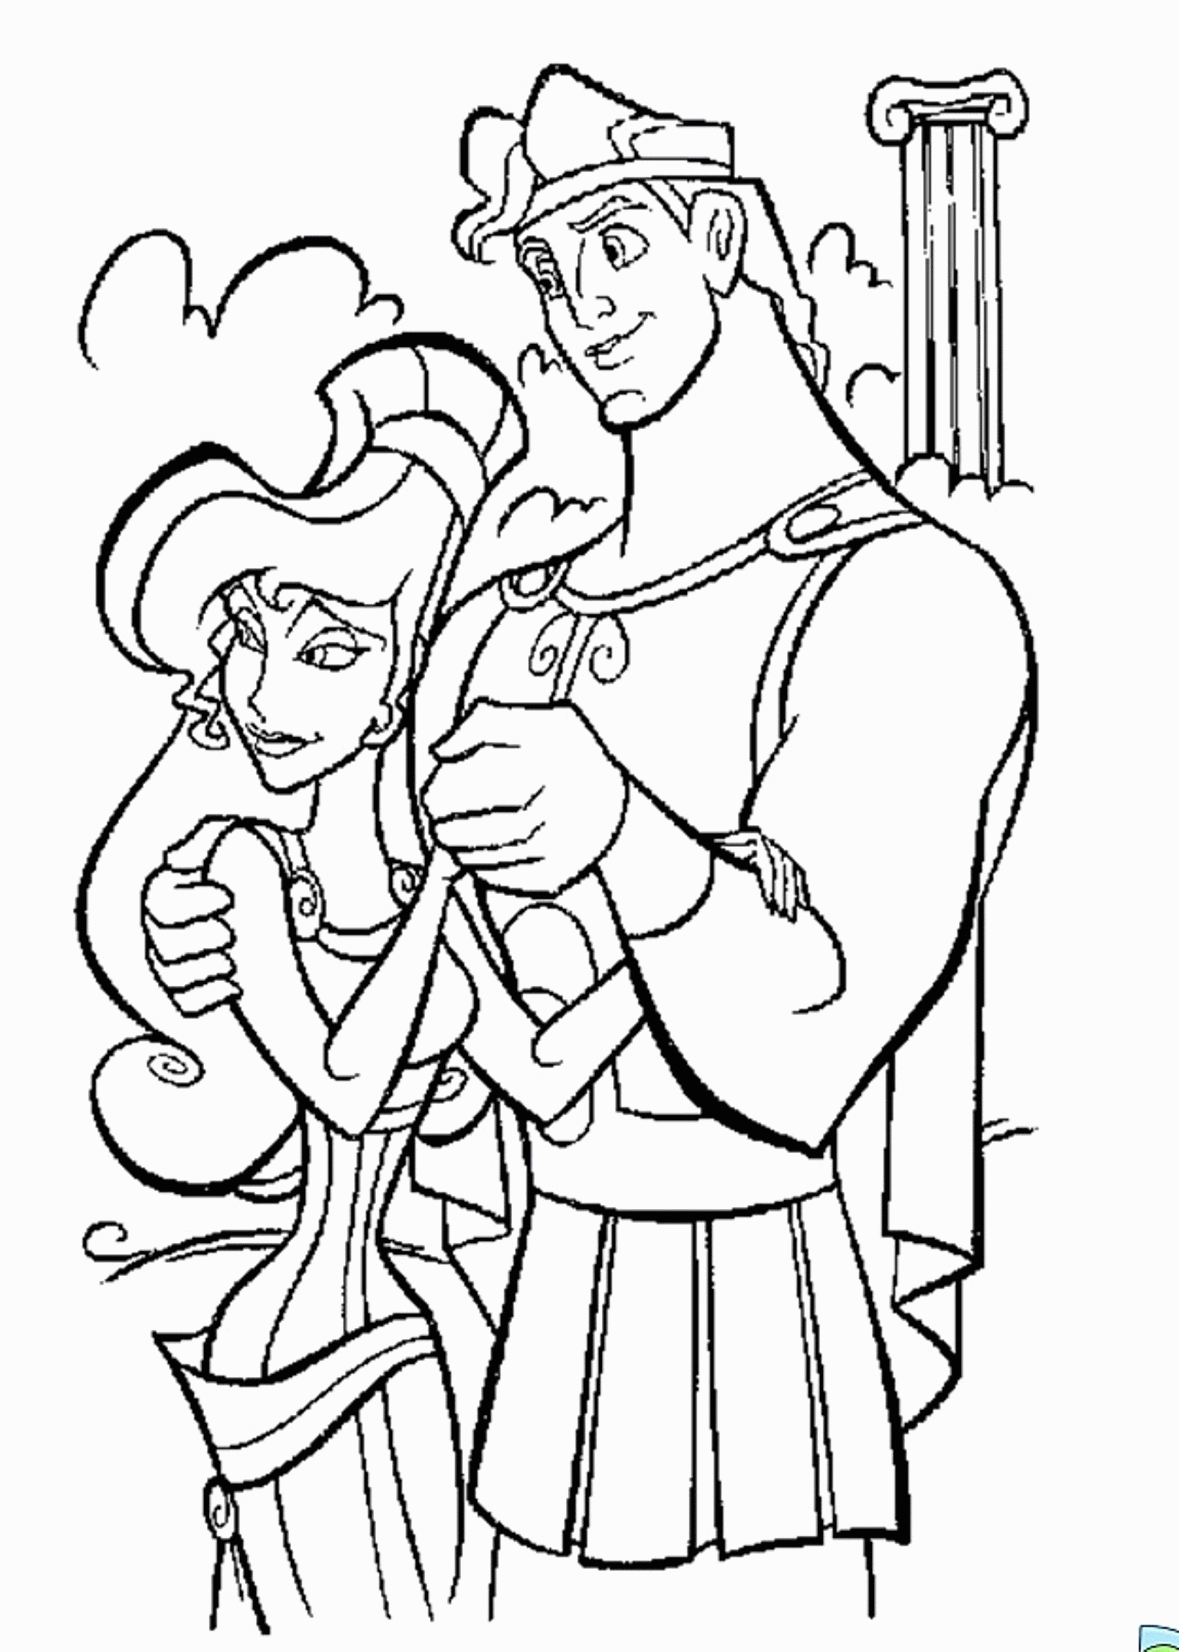 Hercules - Coloring Pages for Kids and for Adults